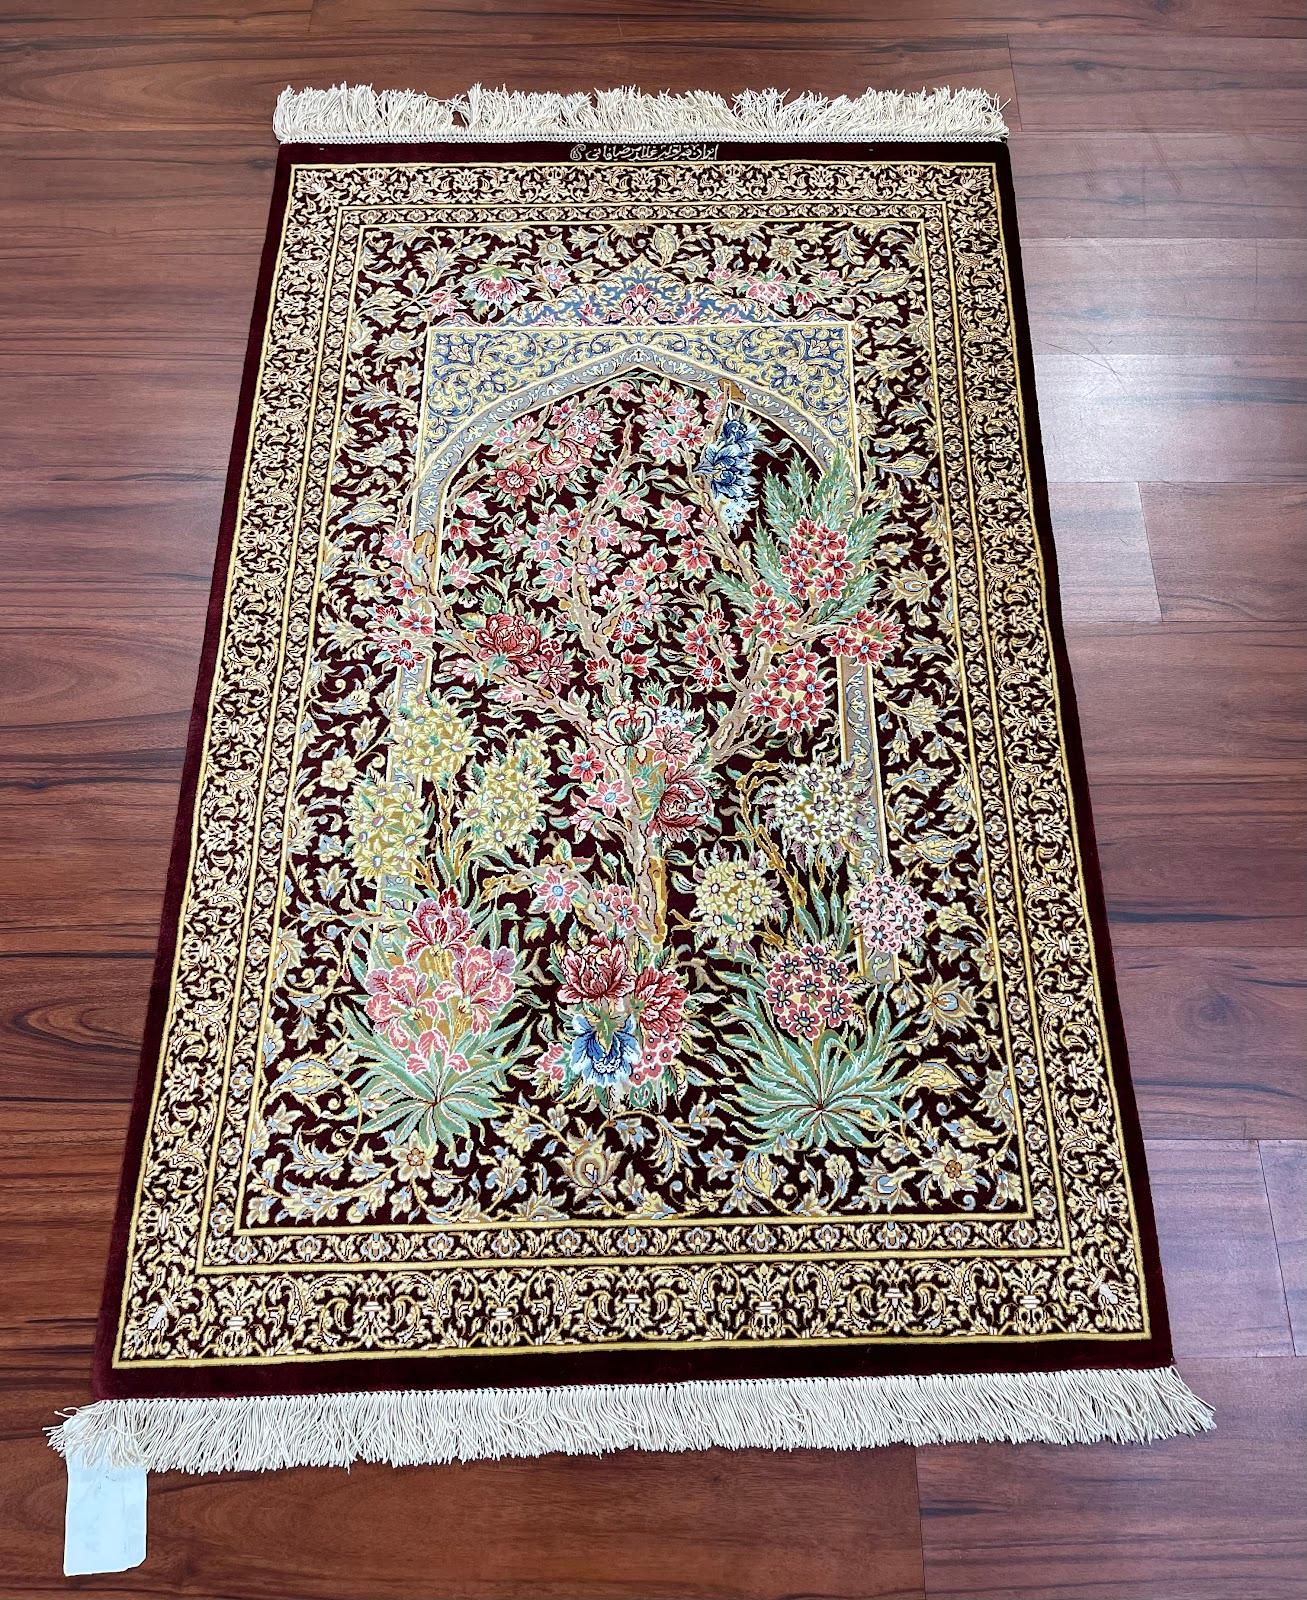 This is a Persian Silk Qum rug originated from iran. The Material is 100% silk. The Dimensions are 2’7”X 4’0” ft. Condition of the item is Excellent. Circa (Date of manufacture) 20th century. 
 